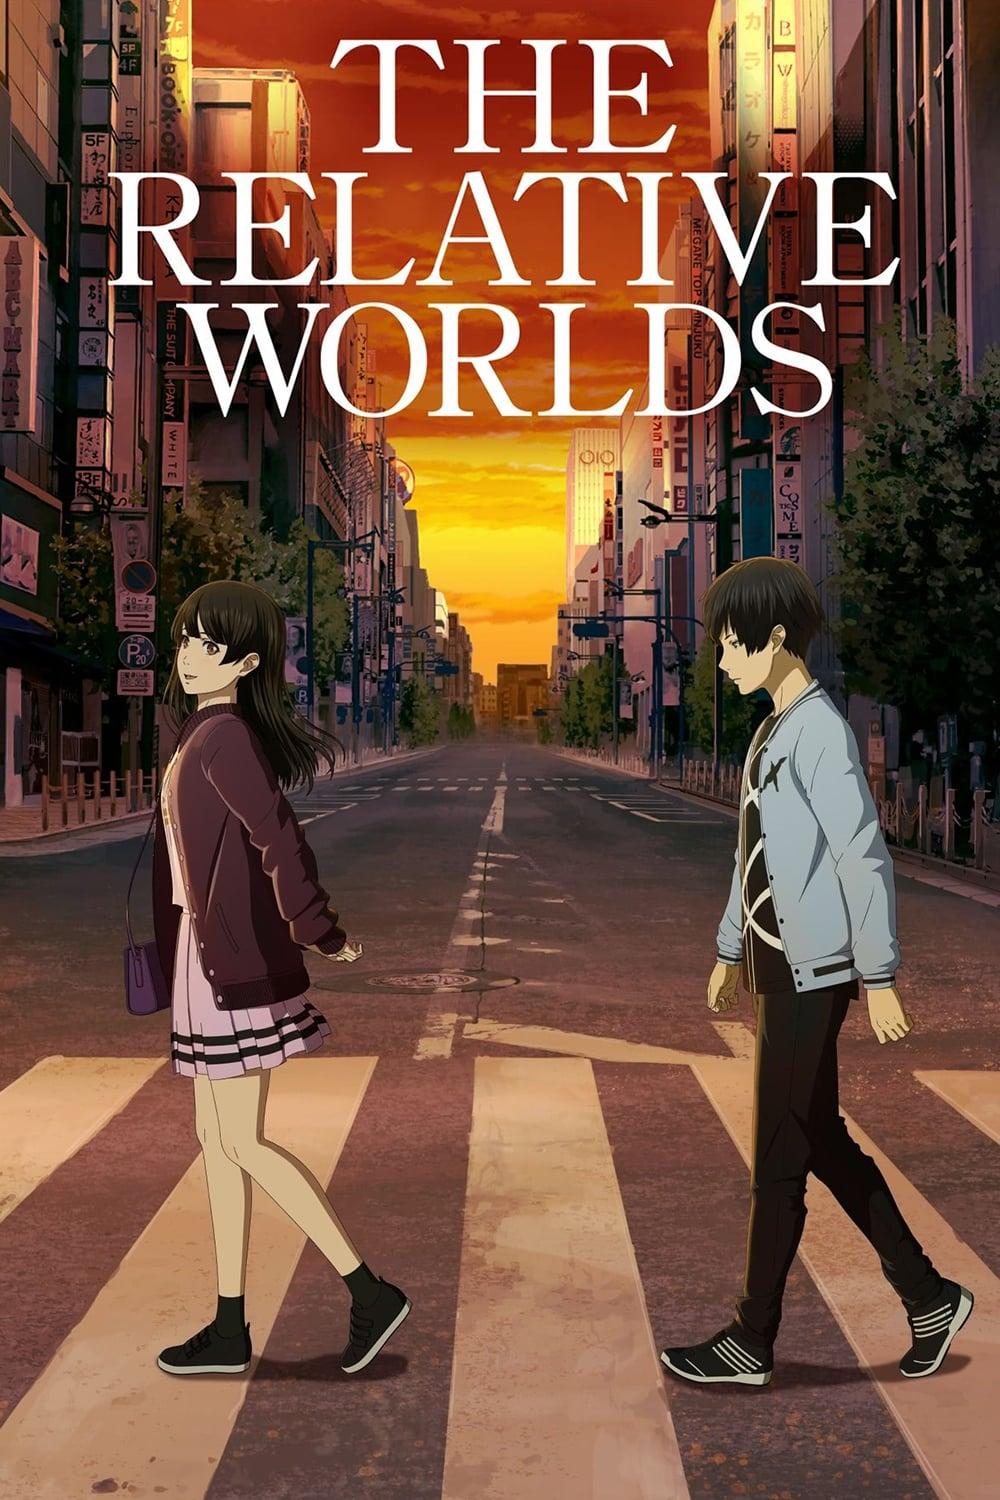 The Relative Worlds poster